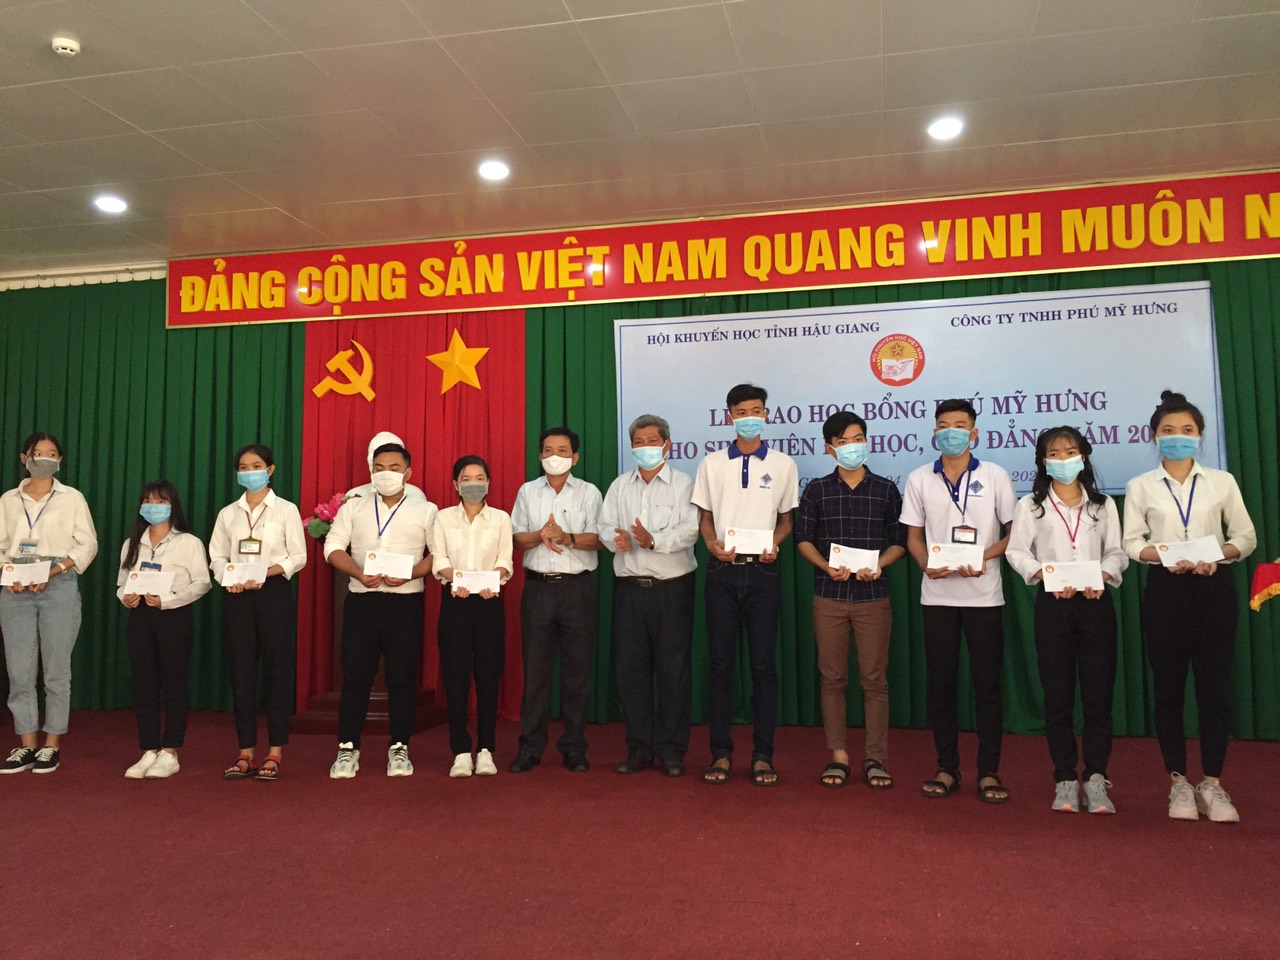 Mr. Nguyen Van Nhan - Chairman of Hau Giang Province the Union of Friendship Organizations grant scholarships for poor students